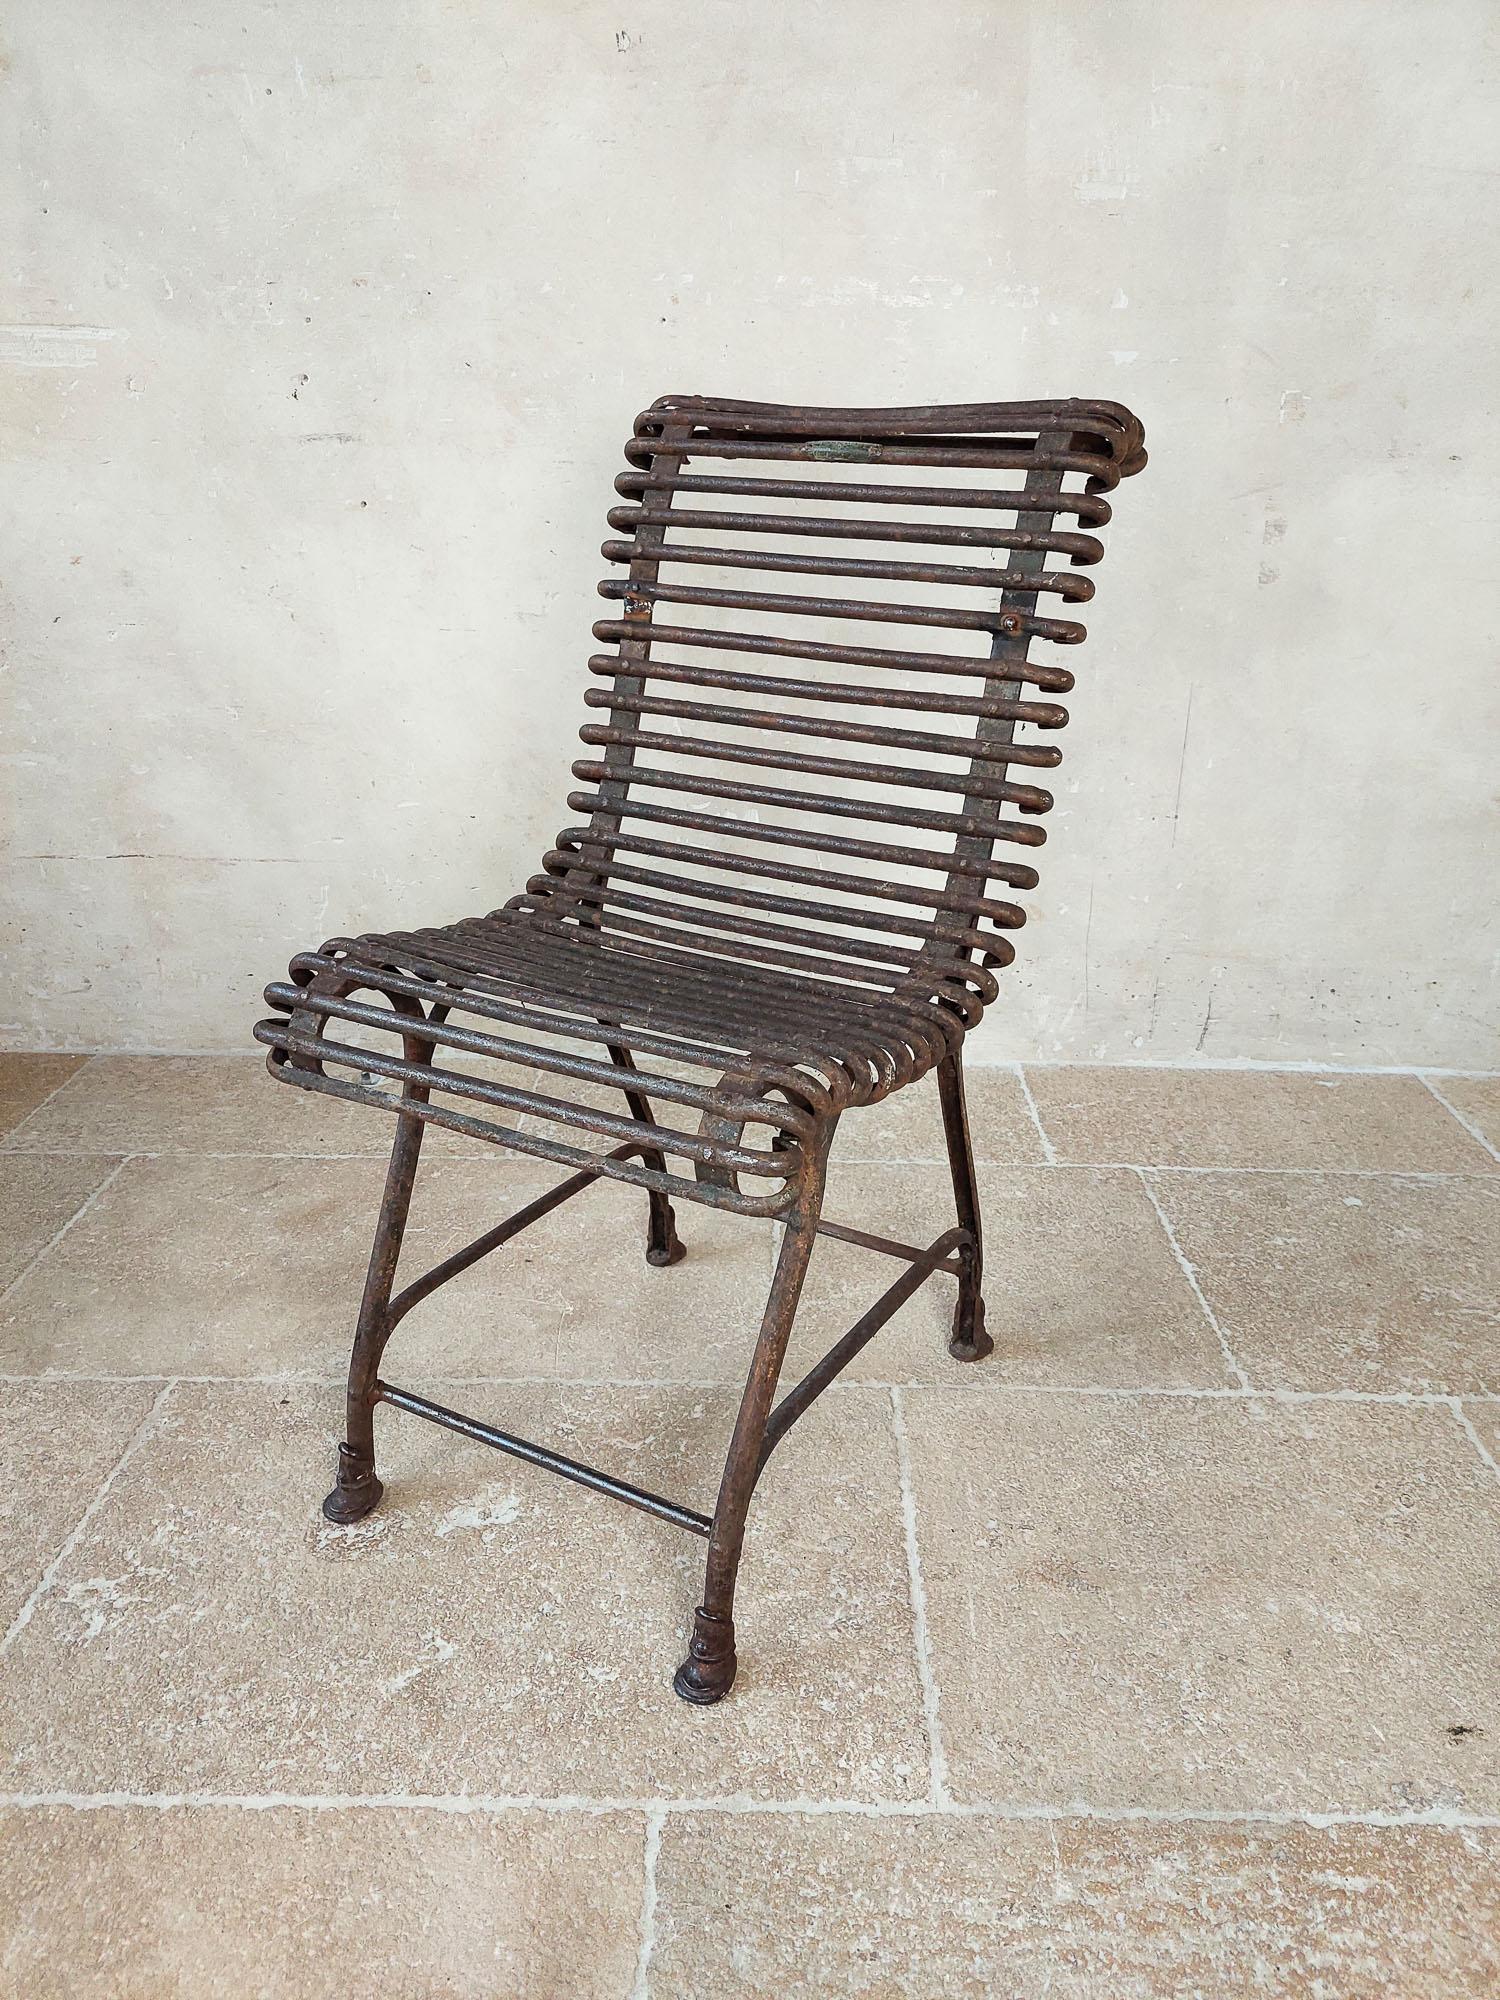 Saint Sauveur Garden Chair from Arras, 1910s. Marked. This garden chair made of wrought iron with cast iron feet. This chair has the characteristic horse hoof feet. Made in the factory in SAINT-SAUVEUR, located in Arras (France). These specialized